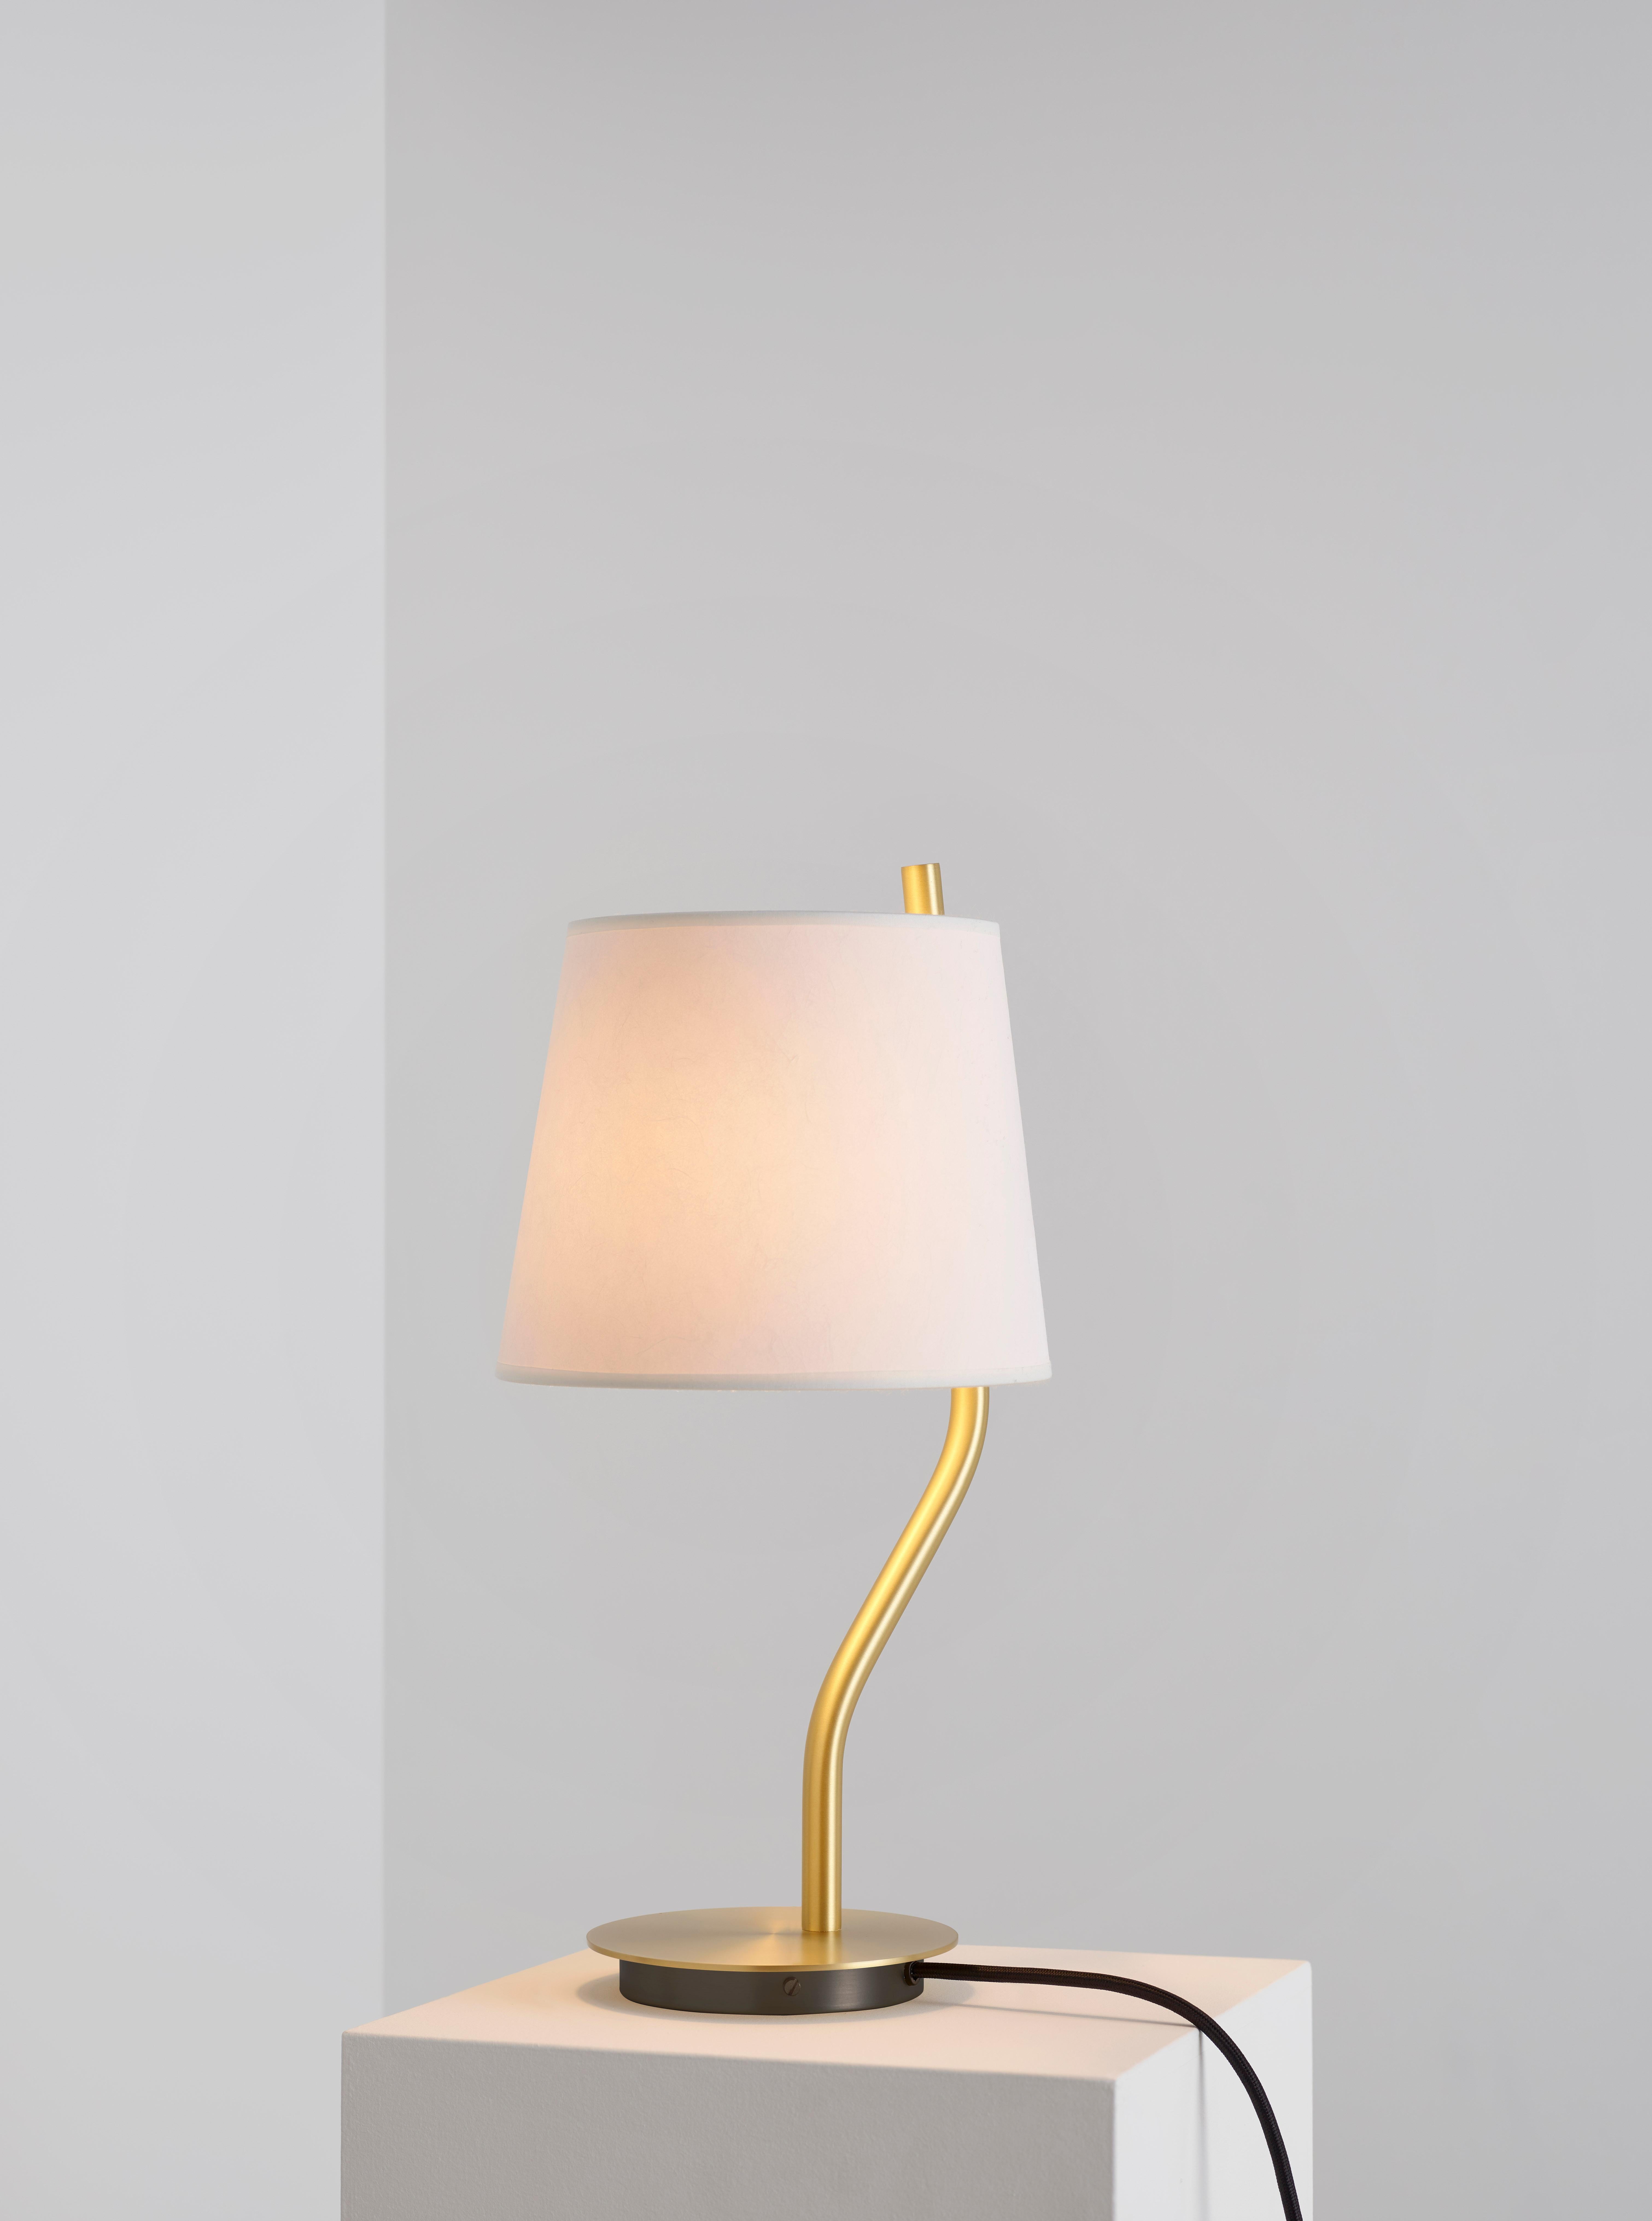 Table lamp couture by Hervé Langlais
Dimensions: 45 H cm
Materials: Satin brass, drop paper
Customizable materials

Arborescence is a complete range in a variety of sizes and finishes. As a flexible concept, you can customize the light into a